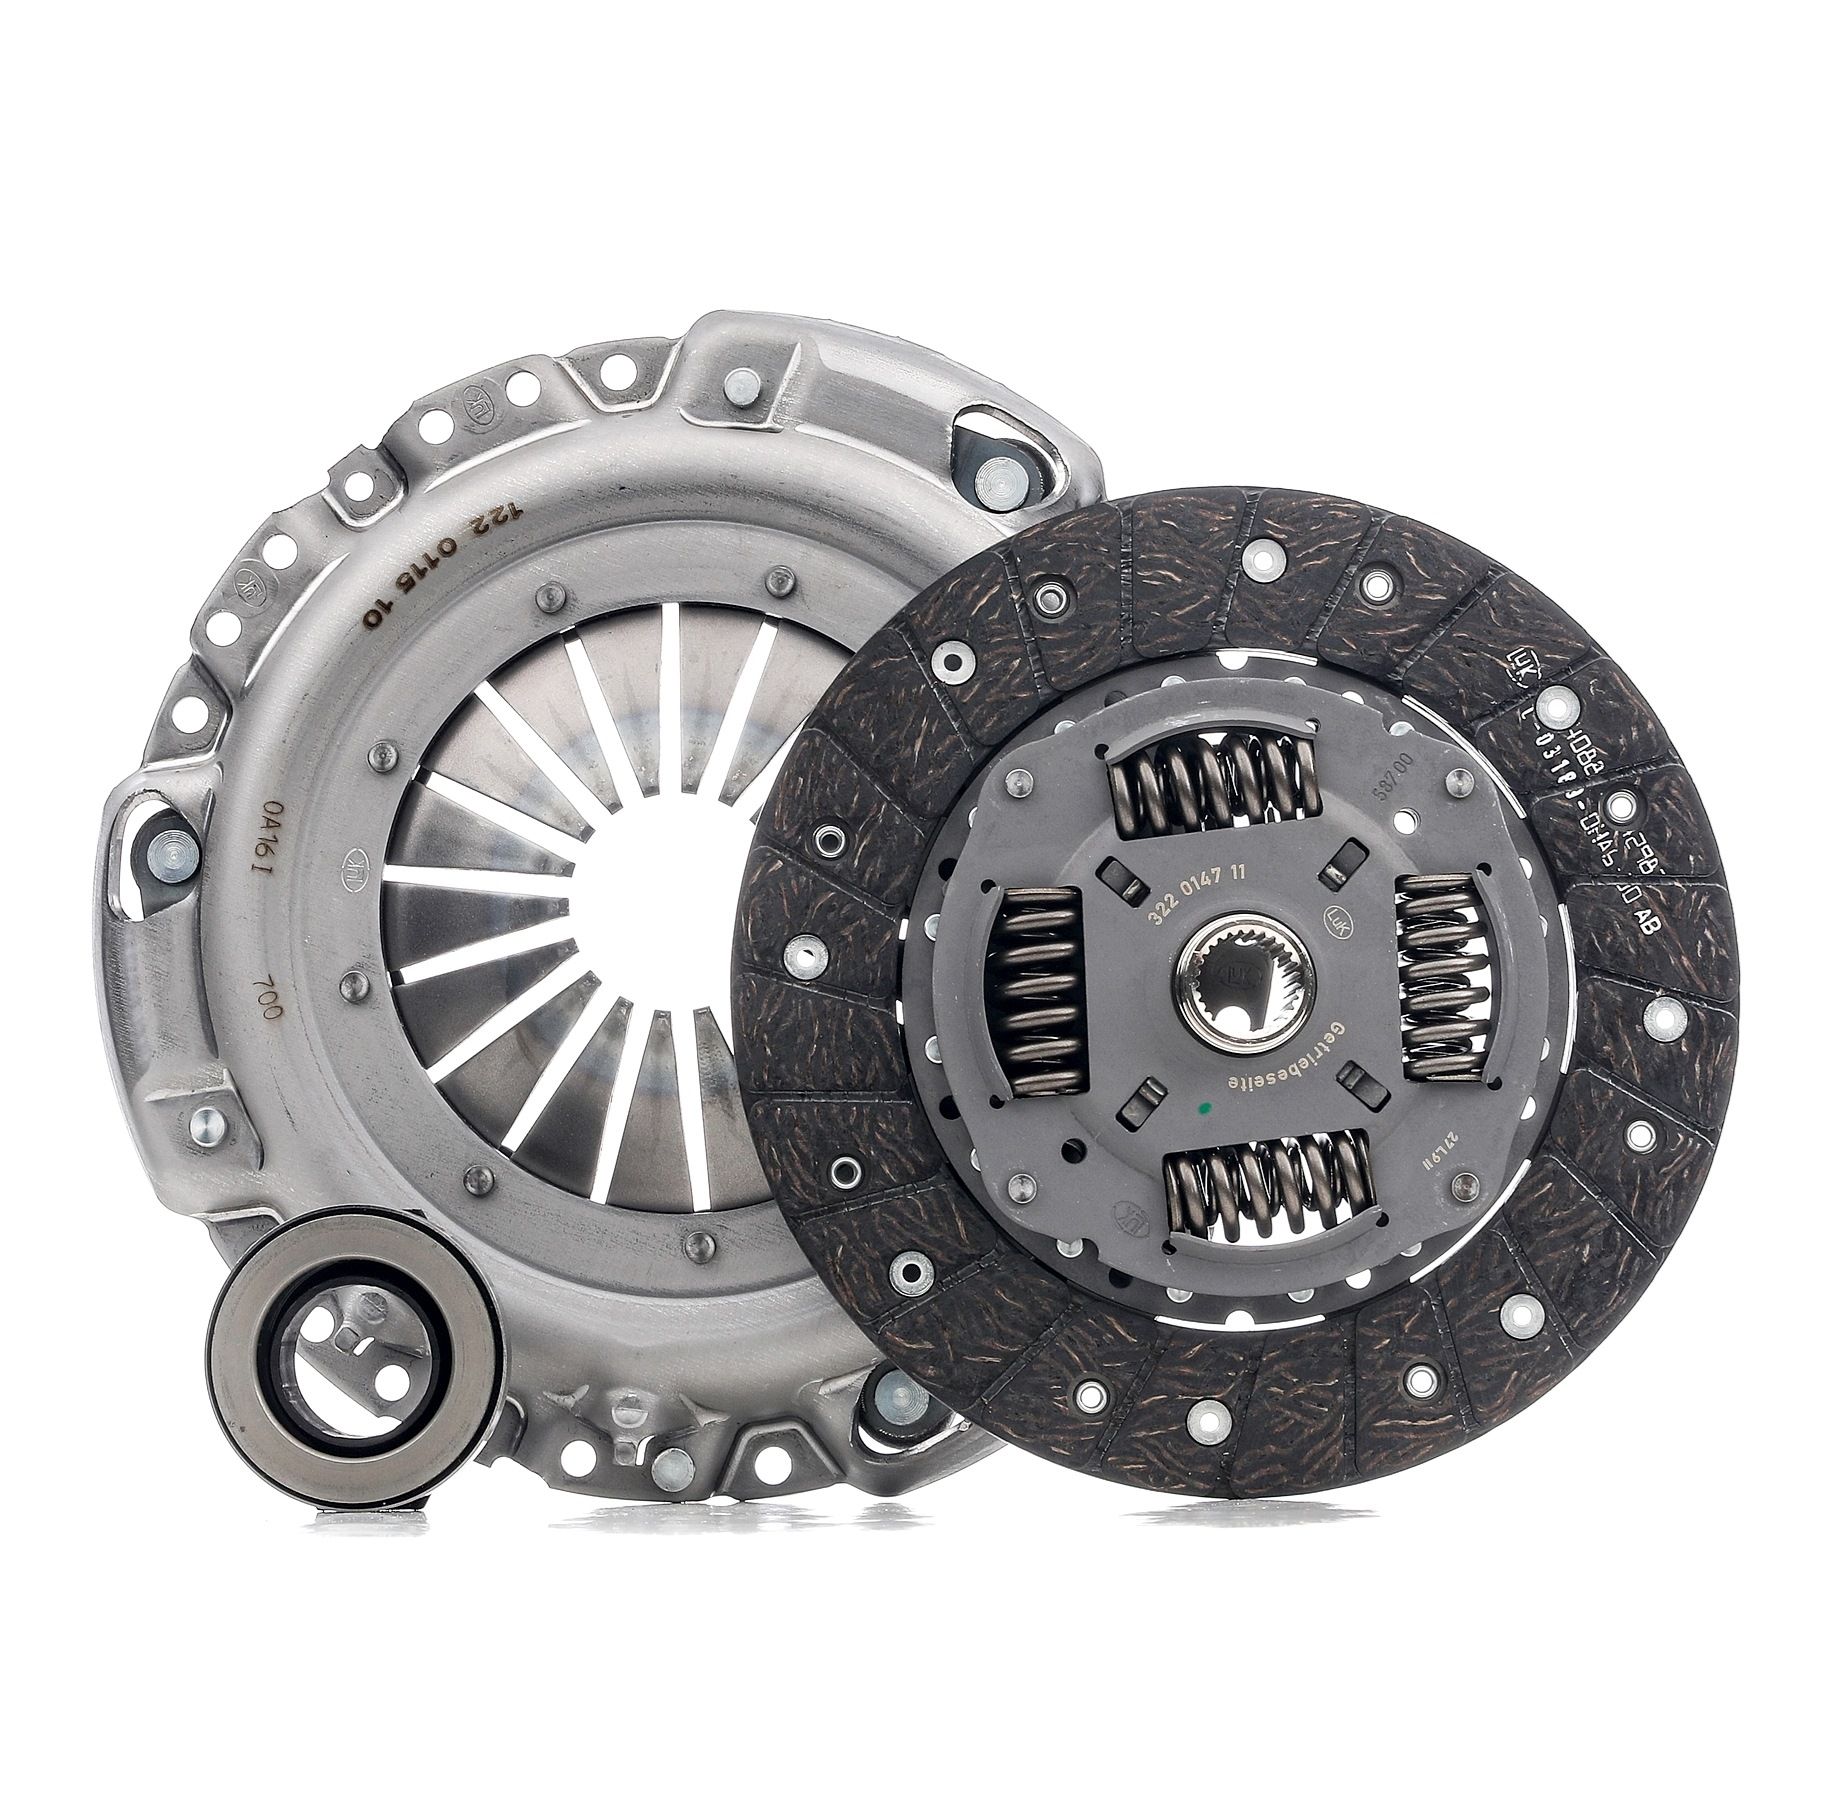 LuK BR 0222 622 0623 00 Clutch kit with clutch release bearing, with clutch disc, 220mm